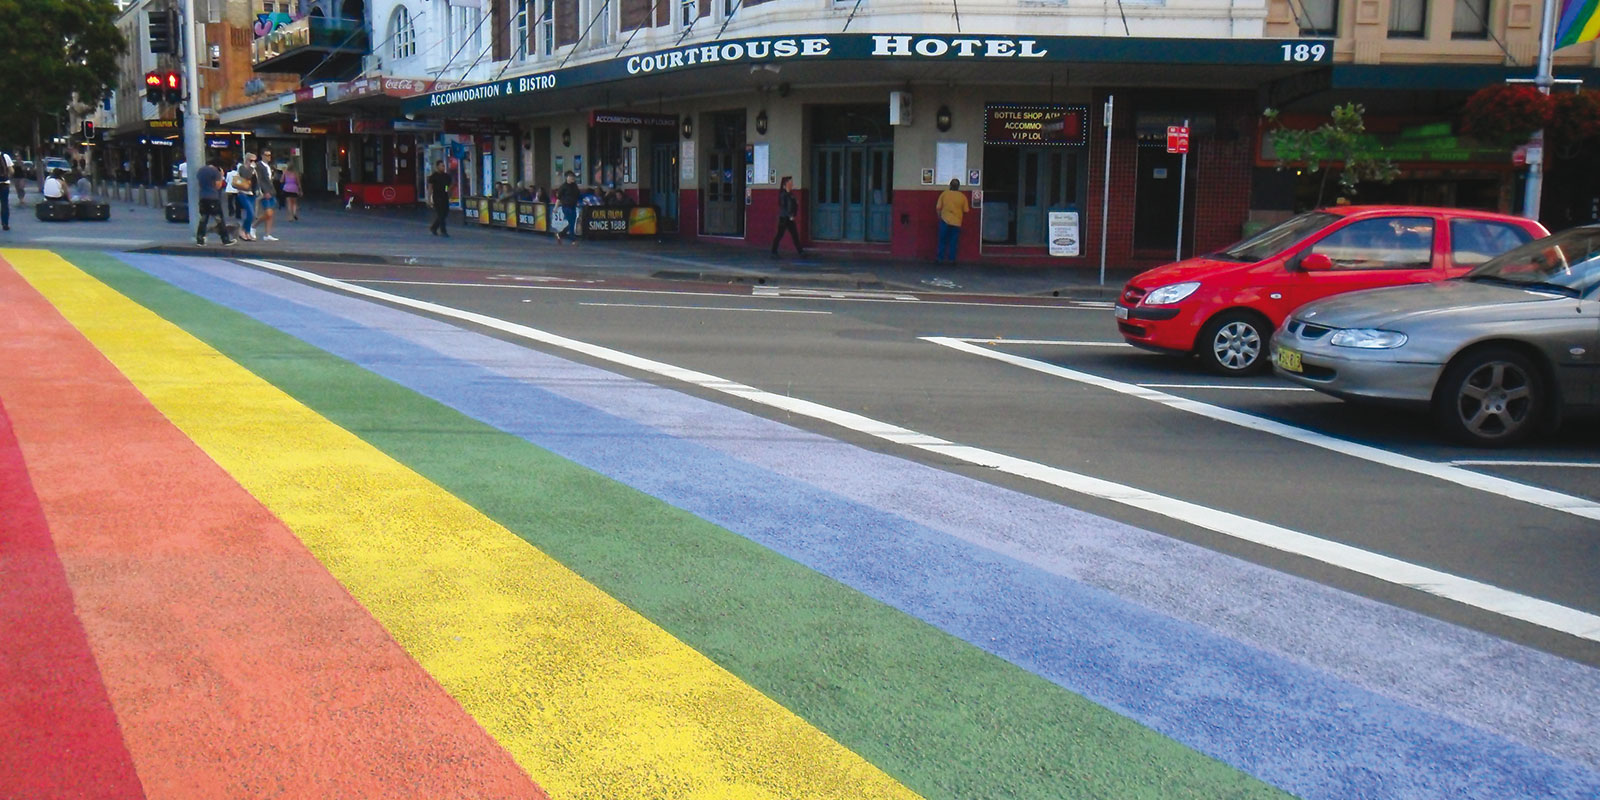 'Taylor Square Rainbow Crossing' by Steven Cateris